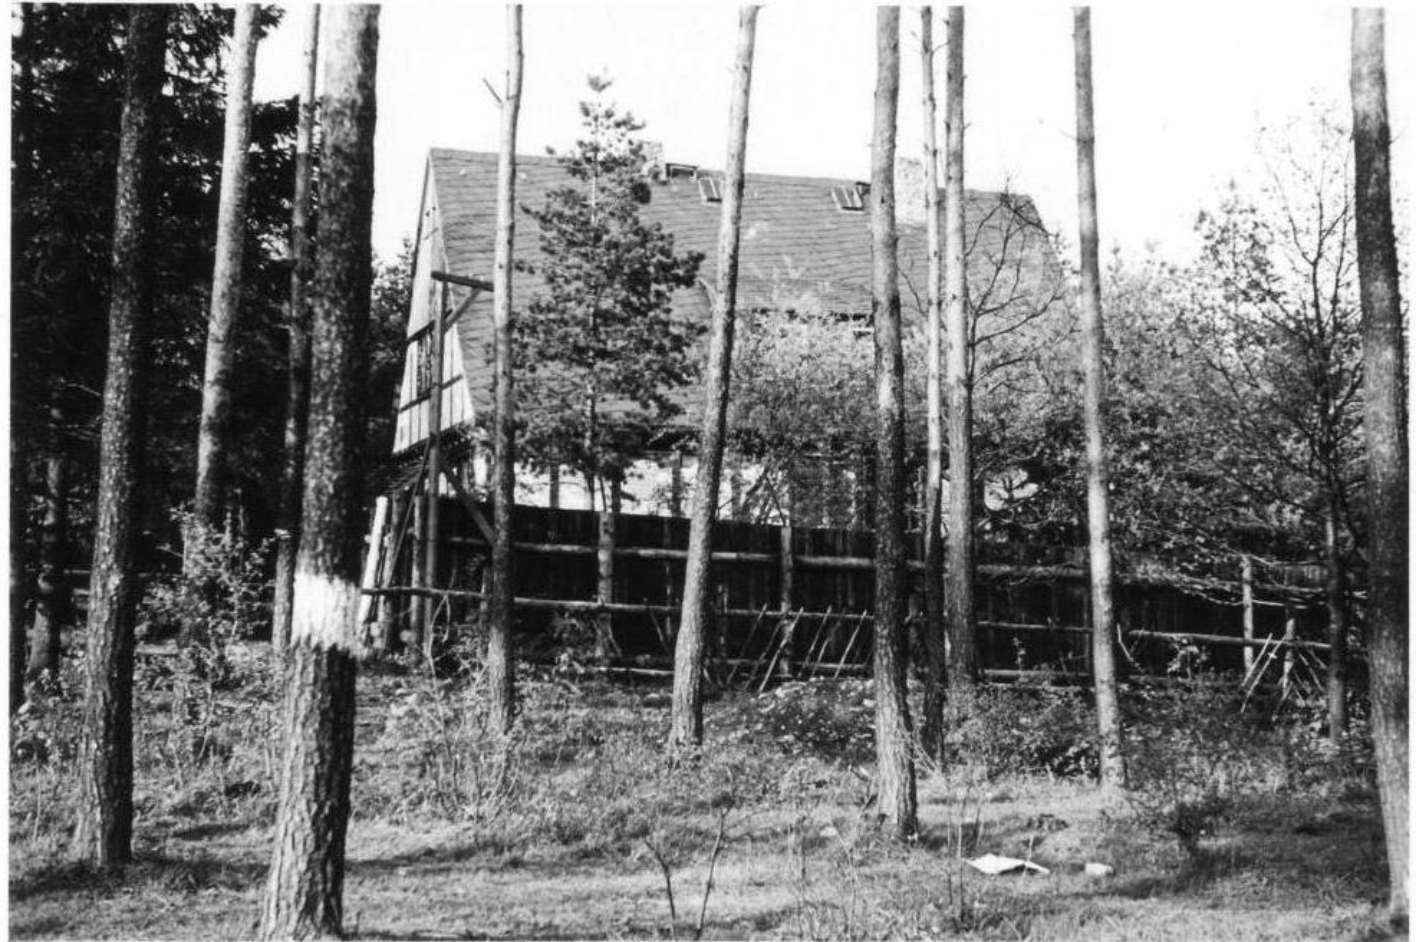 A tall half-timbered building stands between trees, surrounded by an opaque wooden fence. On the left side of the fence is a hawk post. 